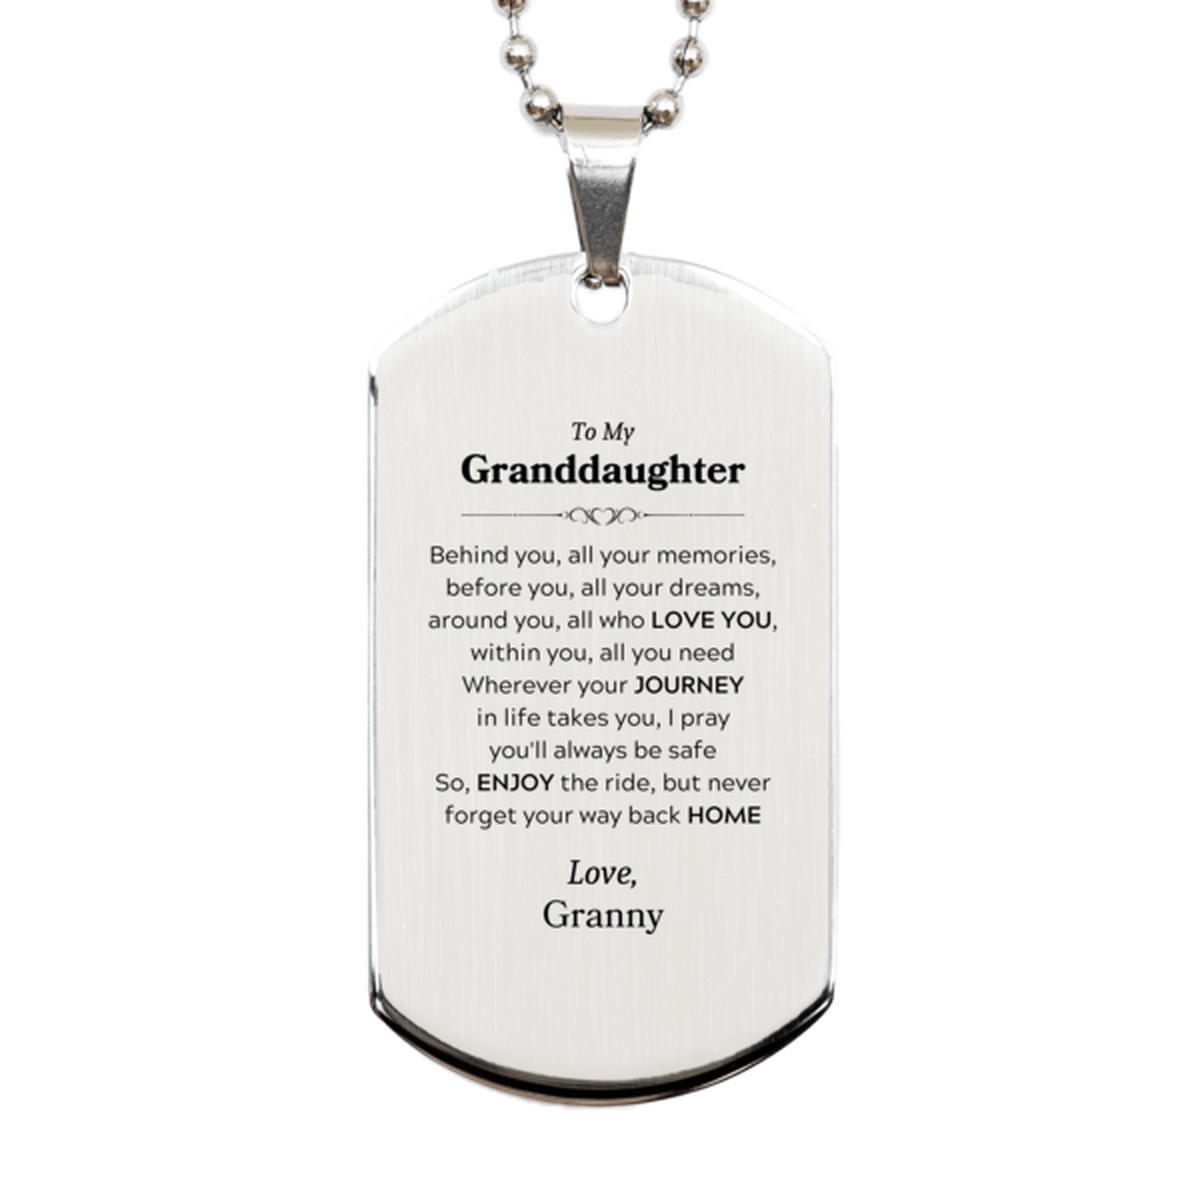 To My Granddaughter Graduation Gifts from Granny, Granddaughter Silver Dog Tag Christmas Birthday Gifts for Granddaughter Behind you, all your memories, before you, all your dreams. Love, Granny